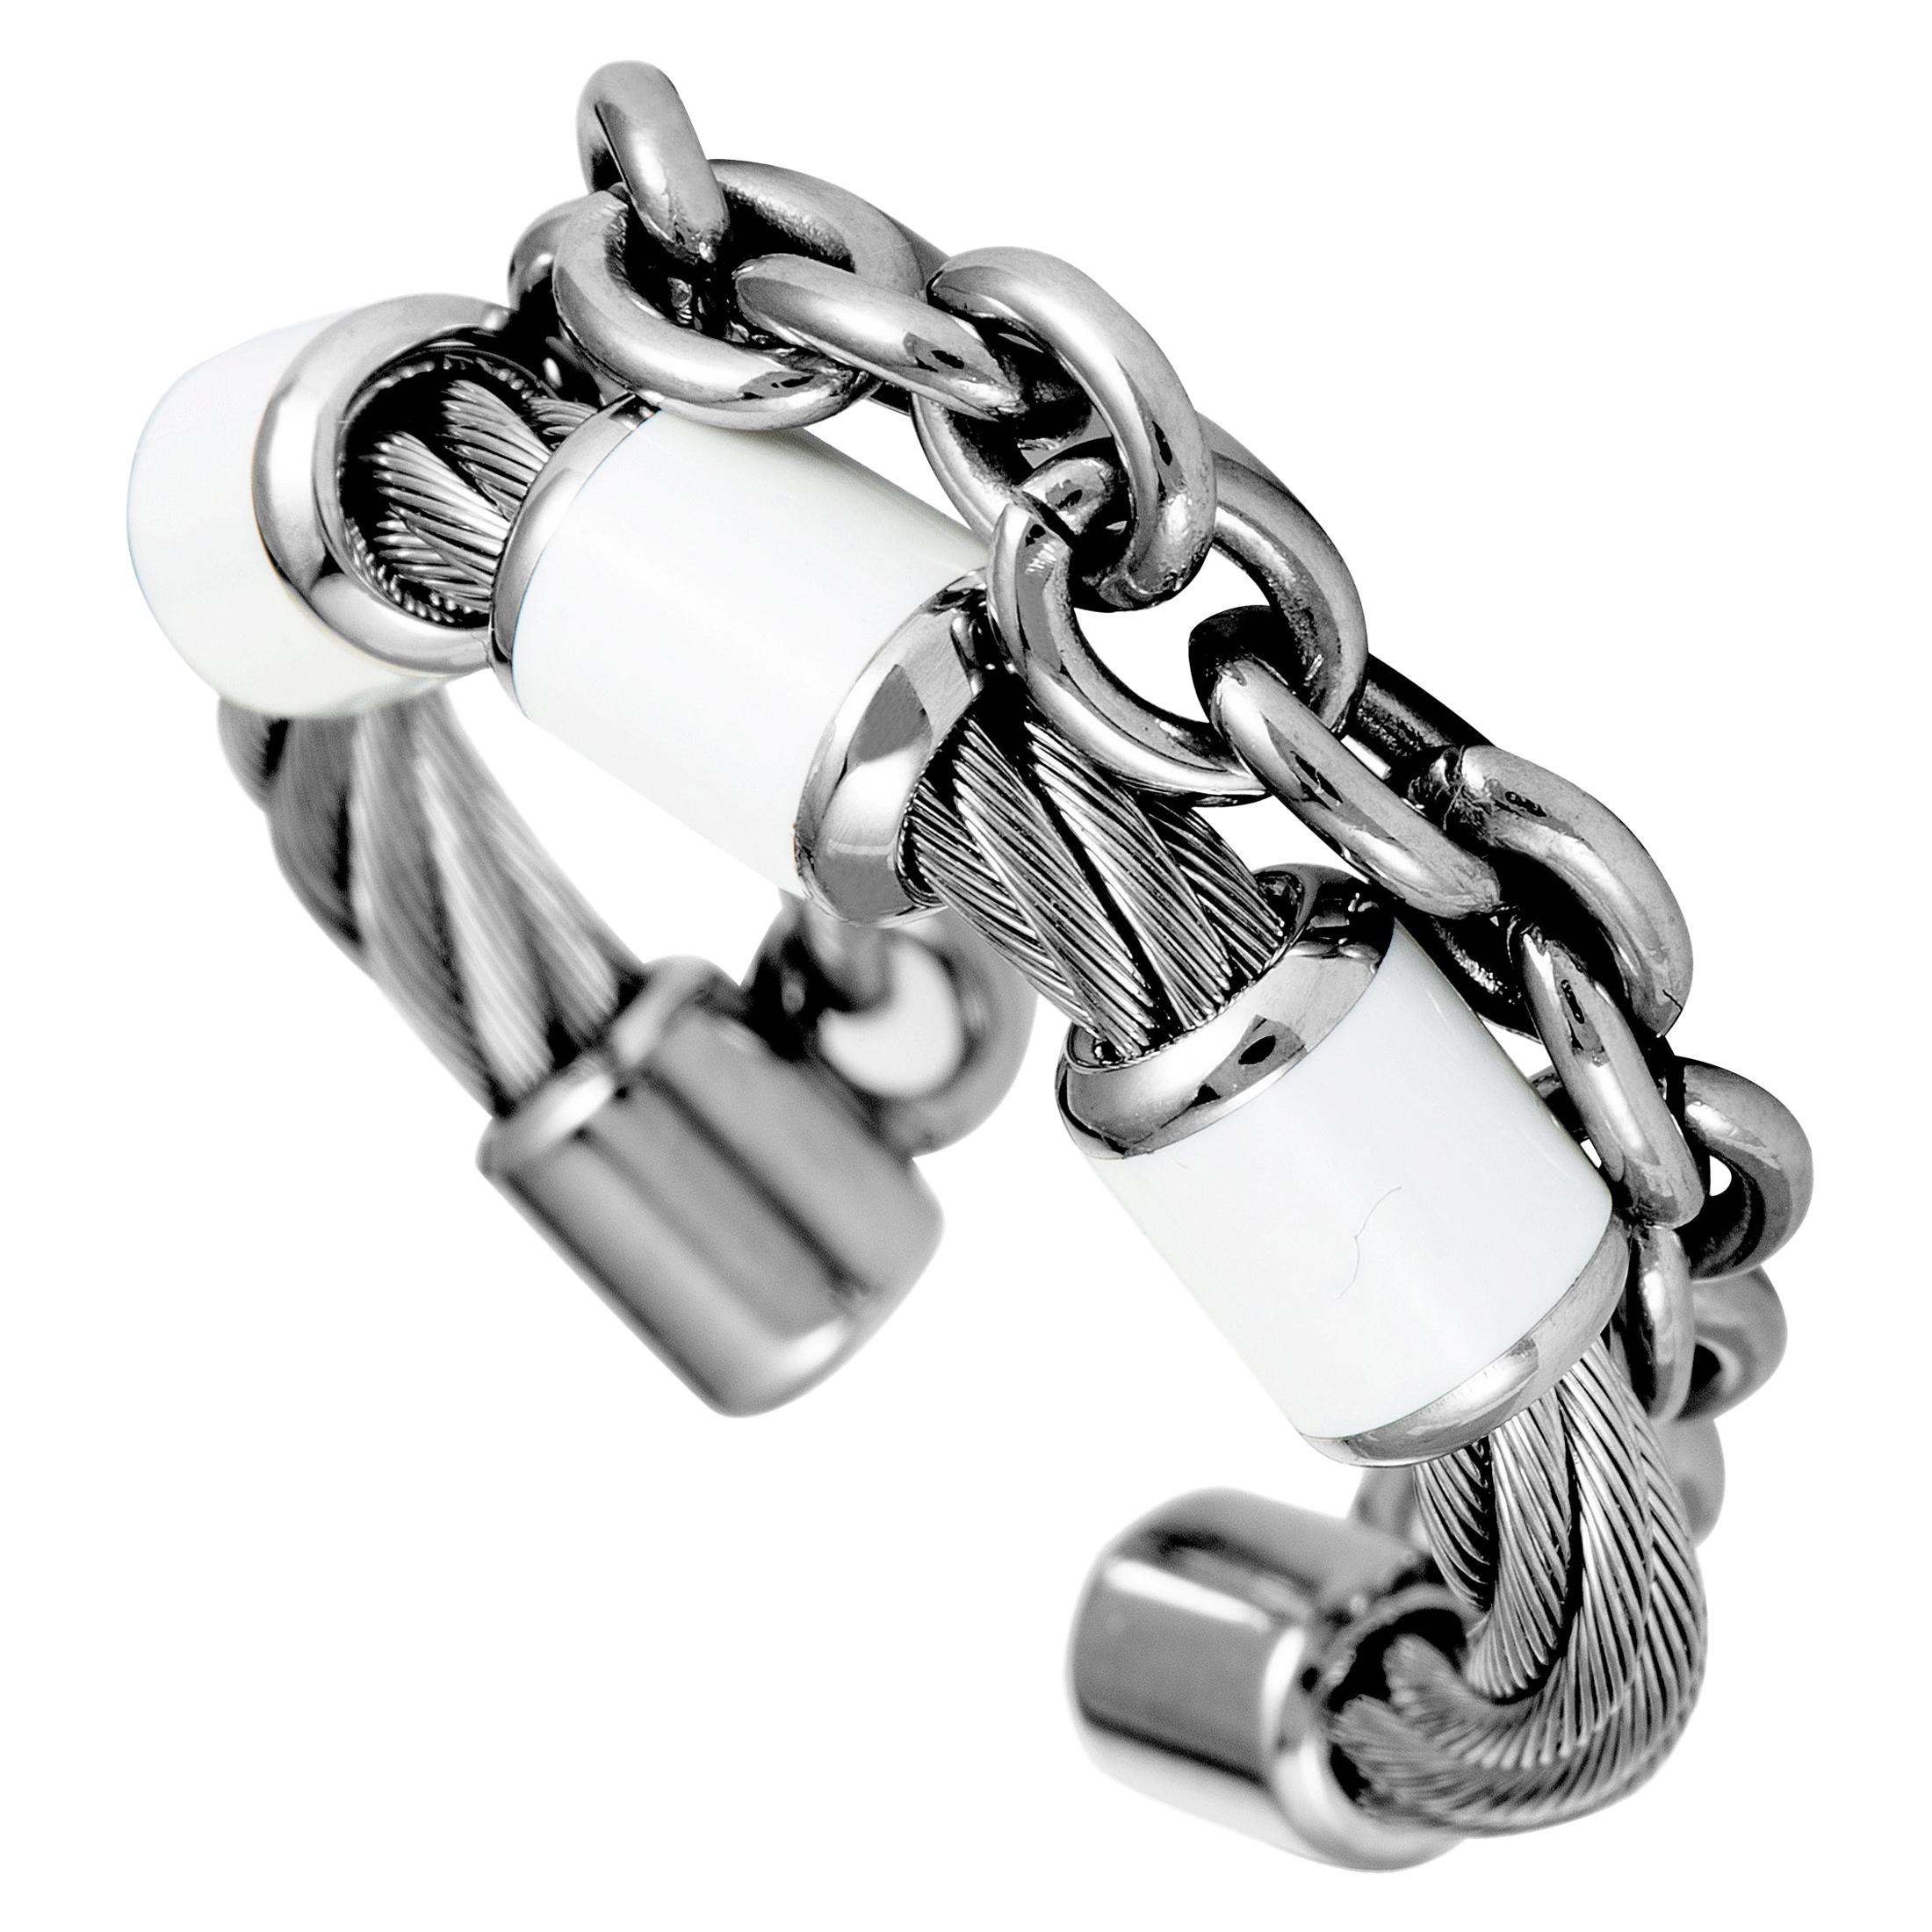 Charriol St. Tropez Stainless Steel White Enamel Cable and Chain Band Ring